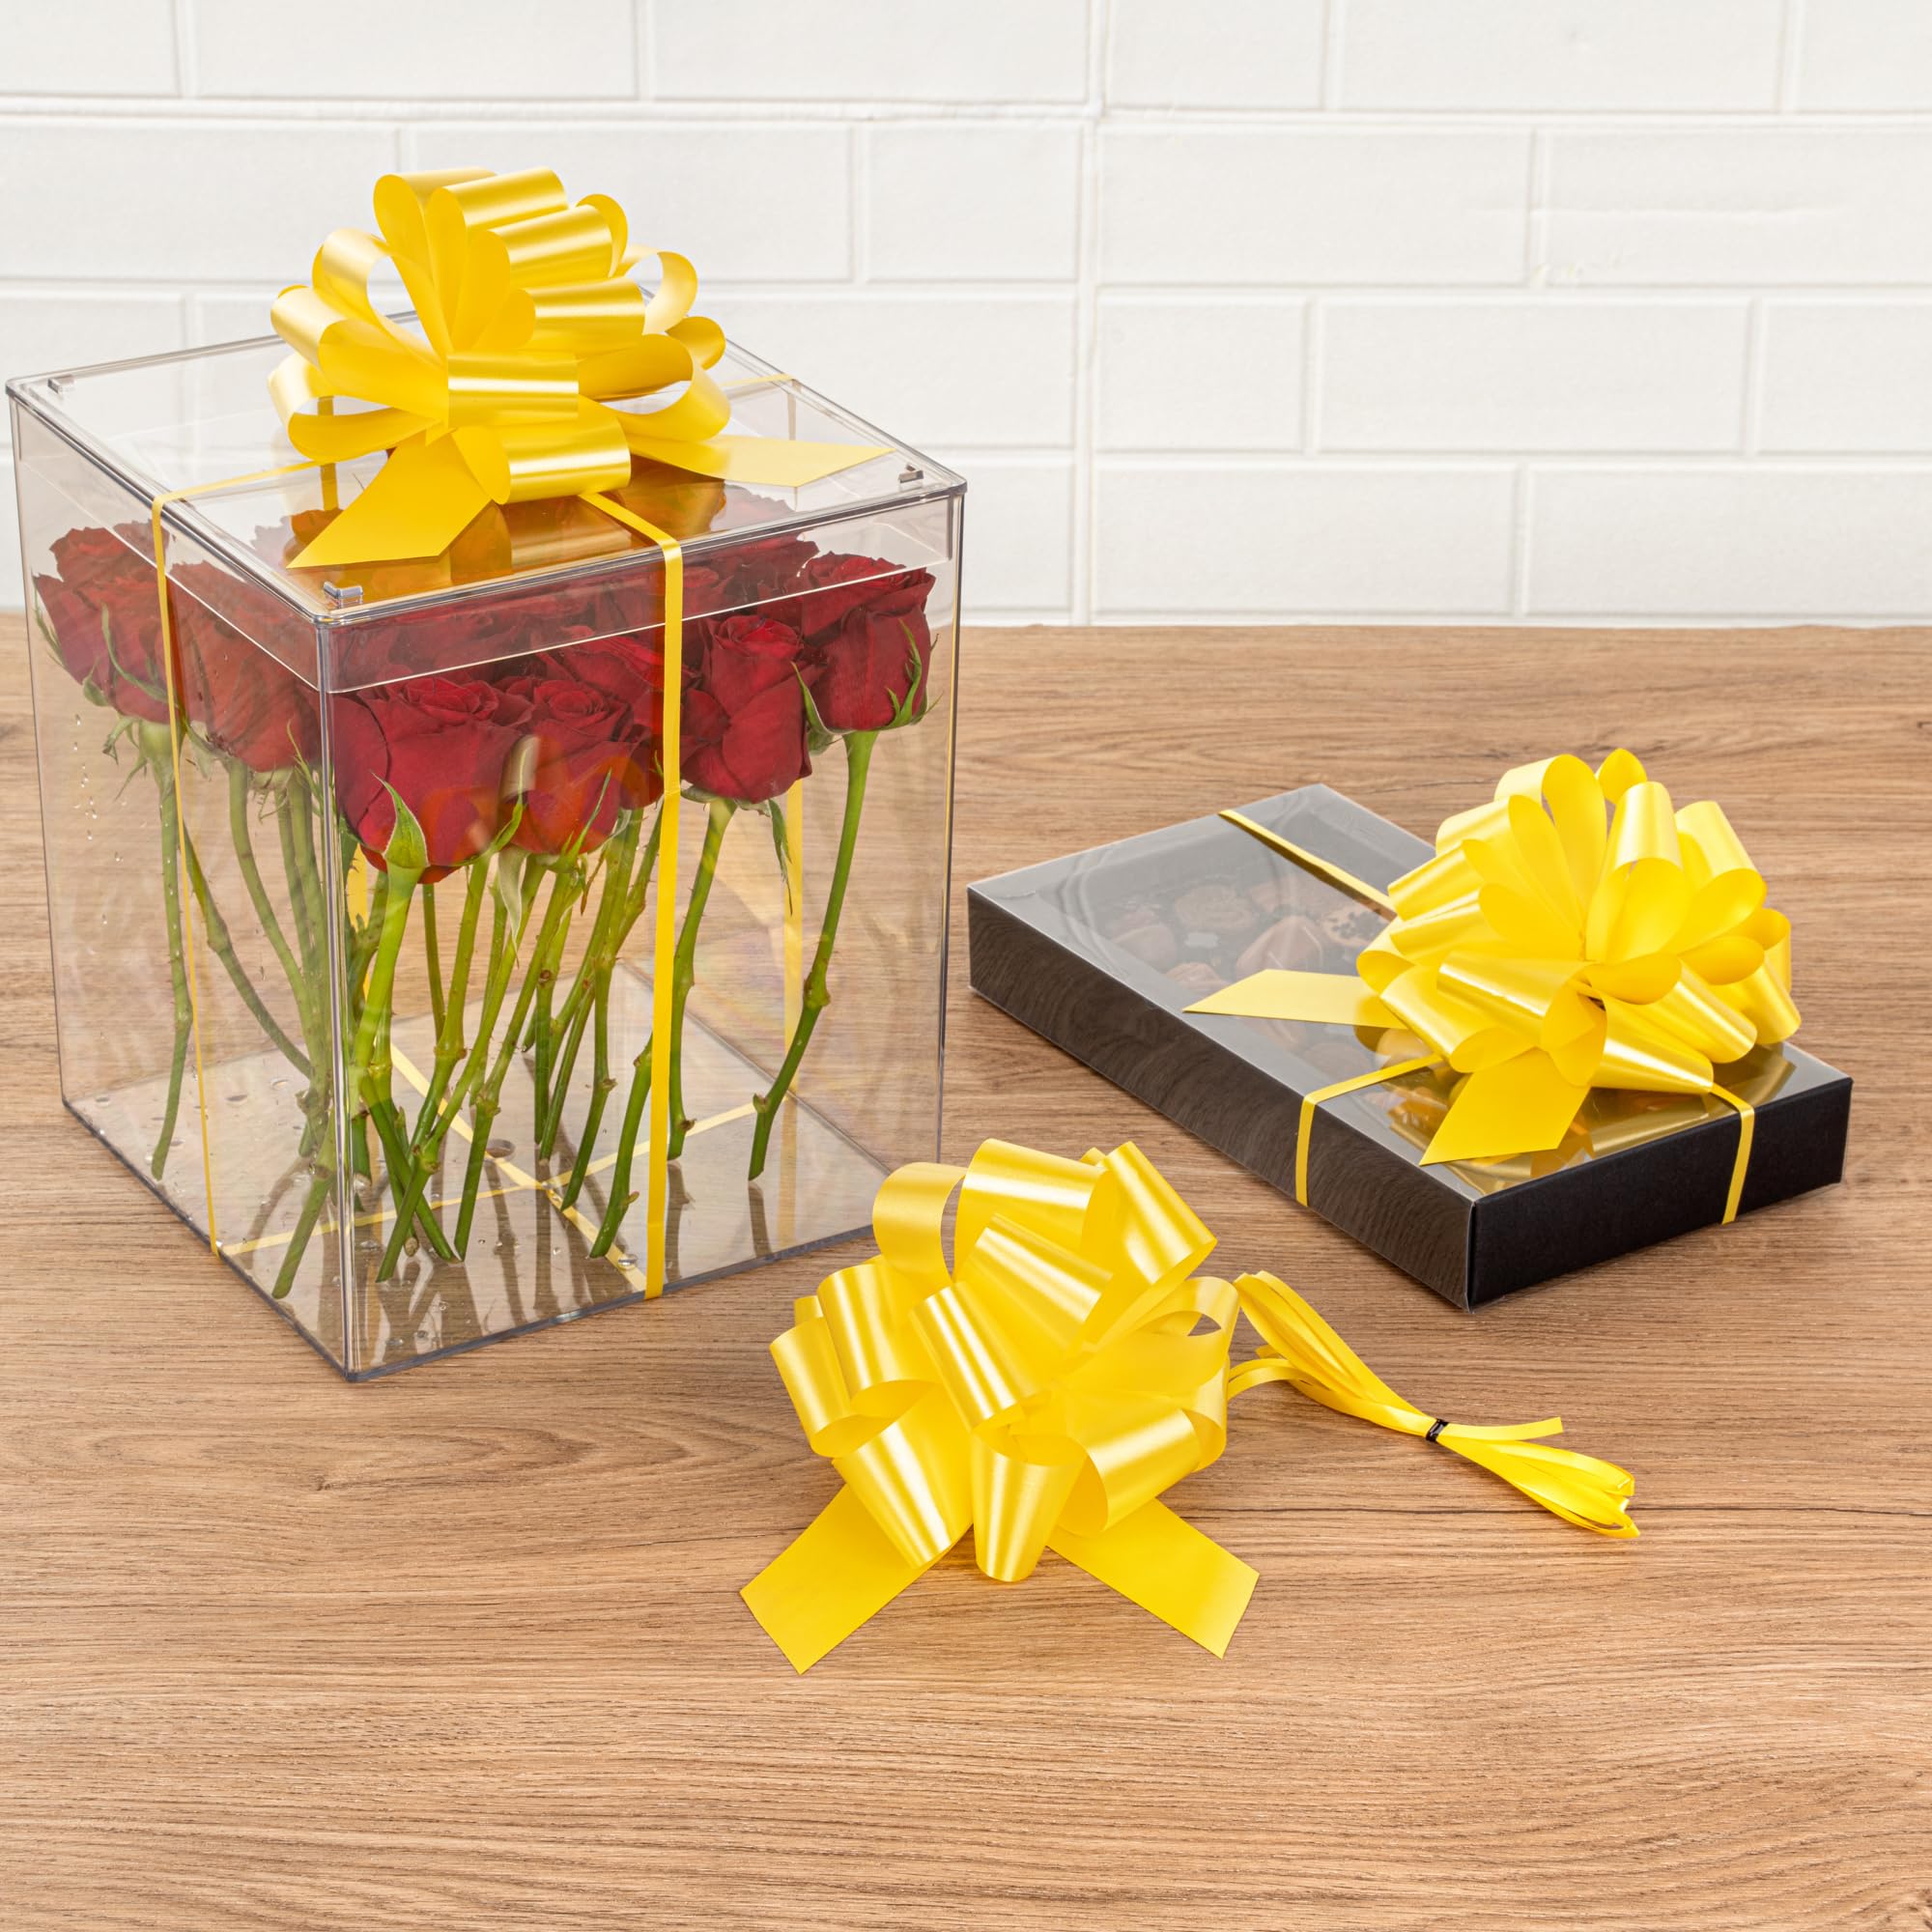 Gift Tek 5.5 Inch Ribbon Pull Bows, 10 Satin Pull Bows - 20 Loops, Instant, Yellow Plastic Flower Bows For Gifts, Large, Instant Bows, For Wedding Gift Baskets, Wraps - Restaurantware